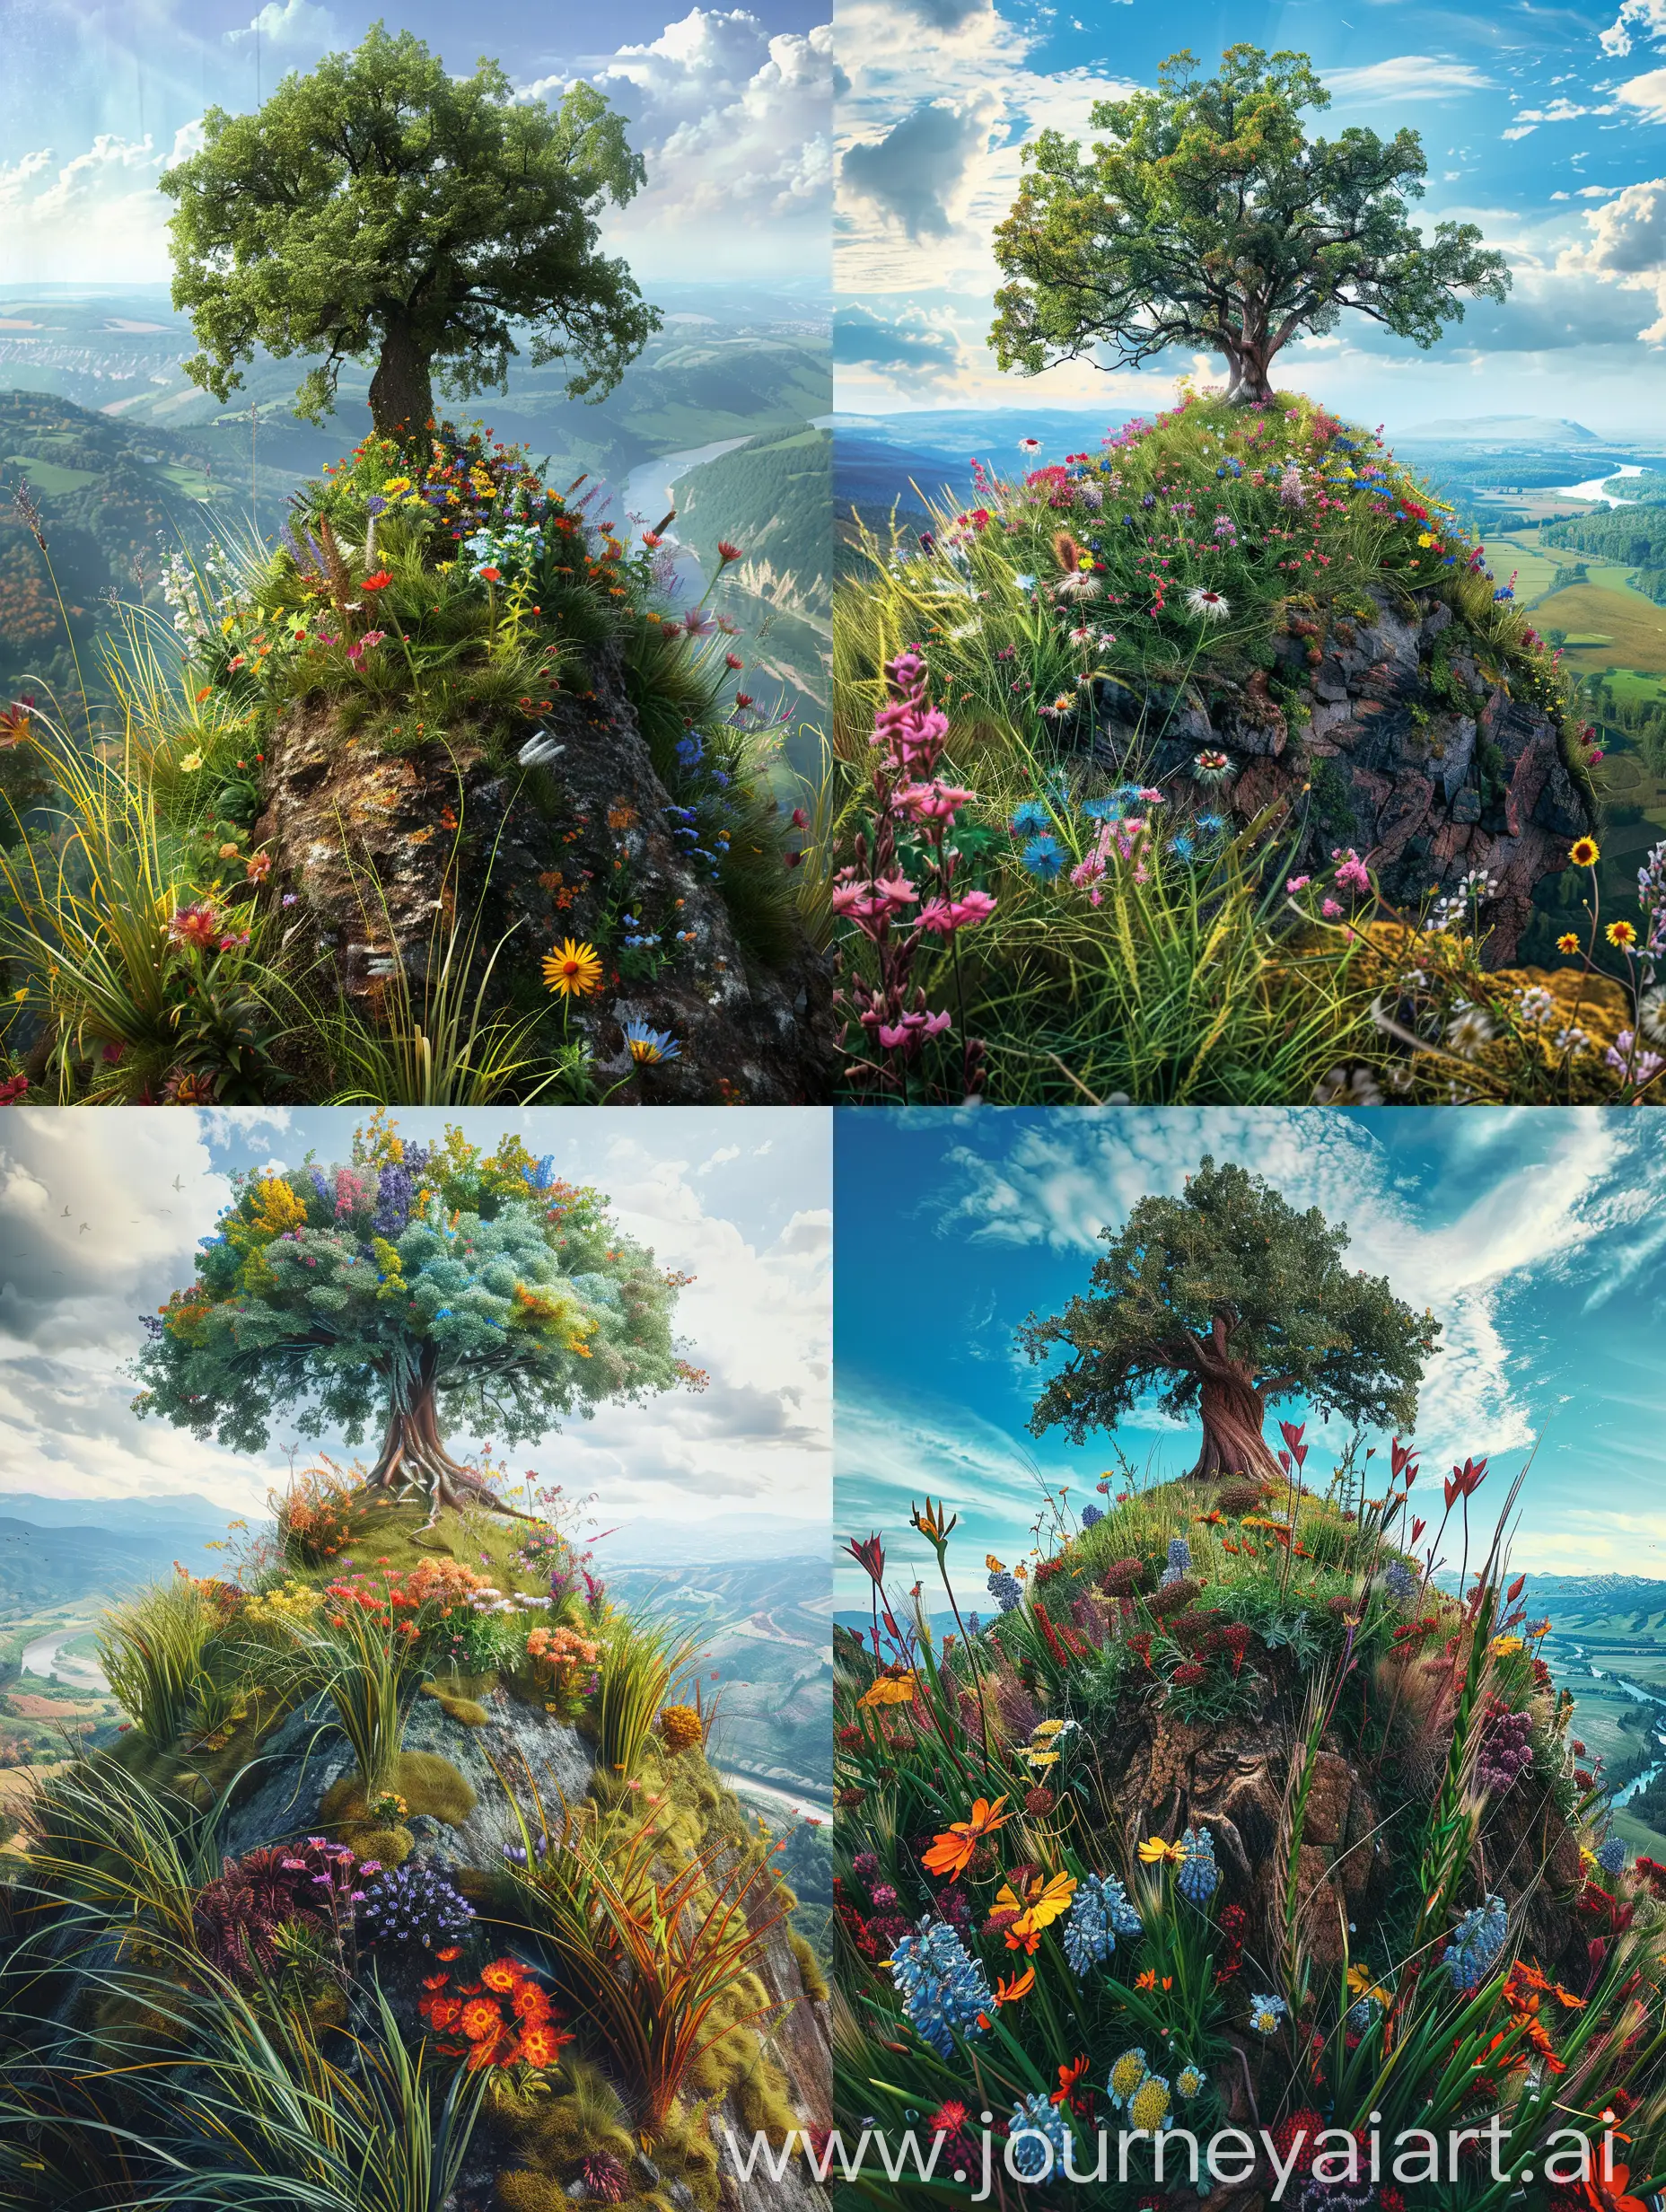 Surreal-Mountain-Landscape-with-Vibrant-Flora-and-Giant-Tree